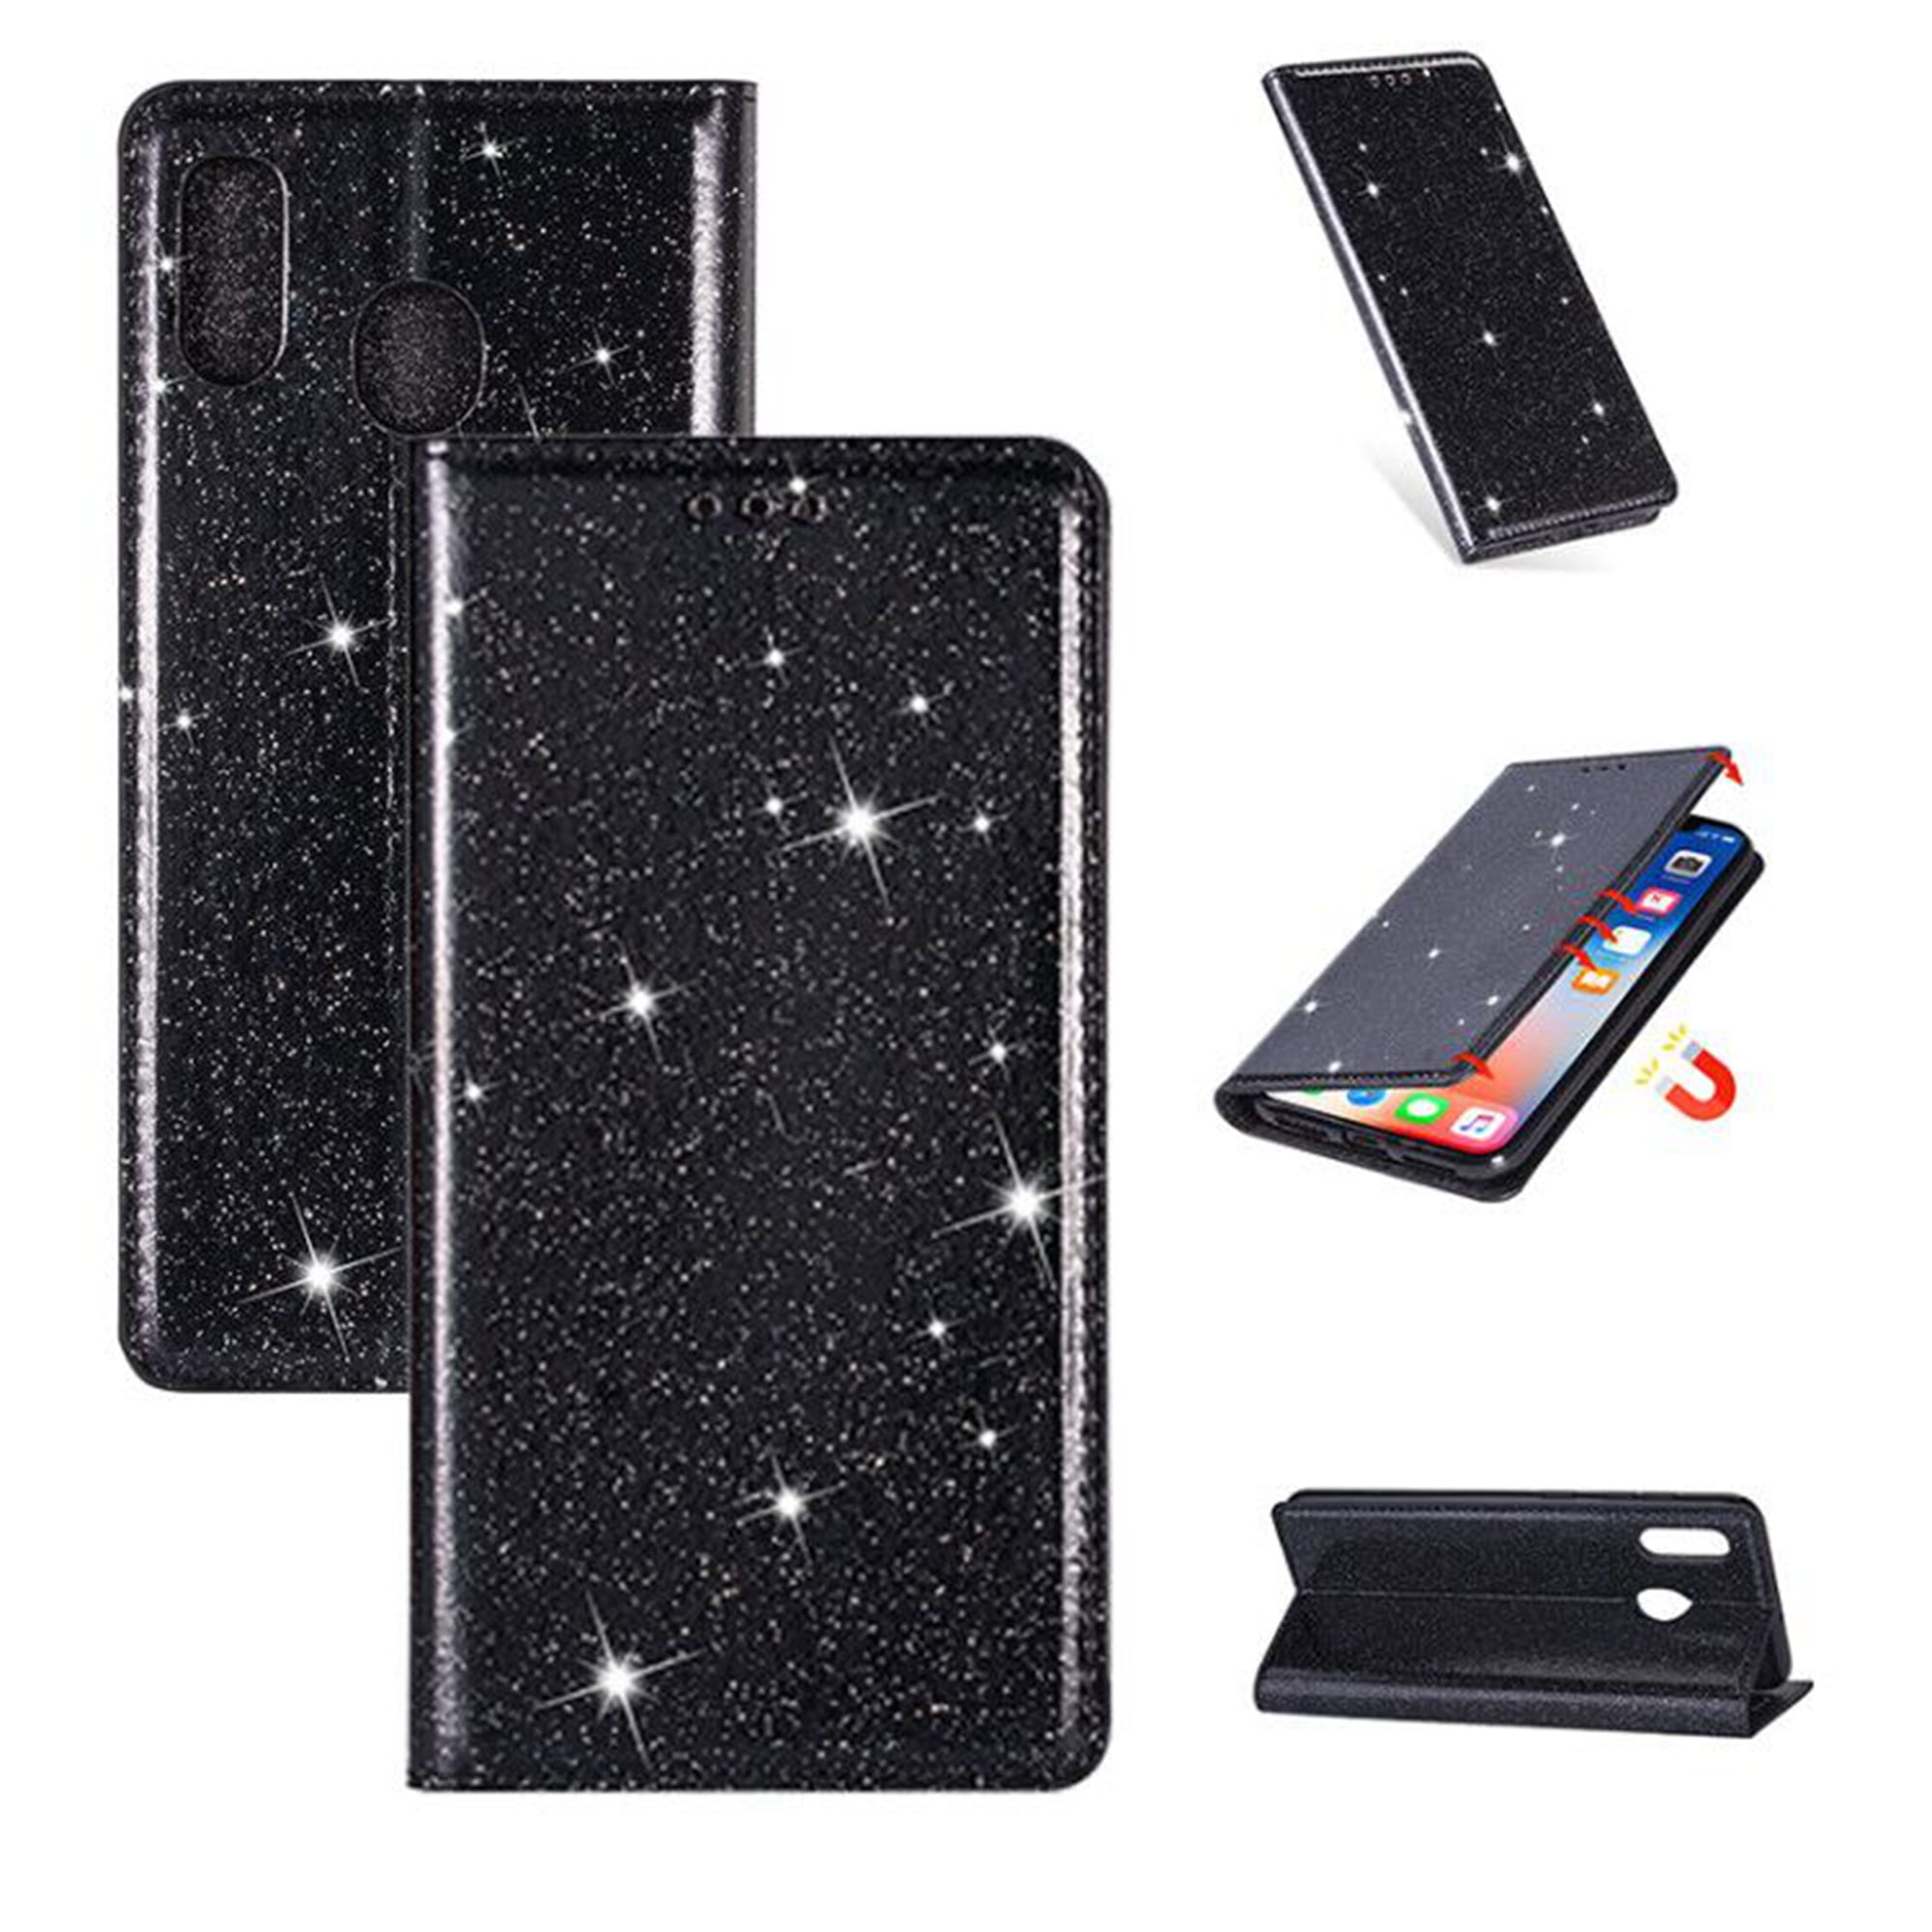 Shinyzone Mirror Leather Flip Cover per Samsung Galaxy A10E A20E,Credit Card Slots Wallet Folding Stand Case with Magnetic Closure and Wrist Strap,Soft Slim Full Body Protective Case,Black 